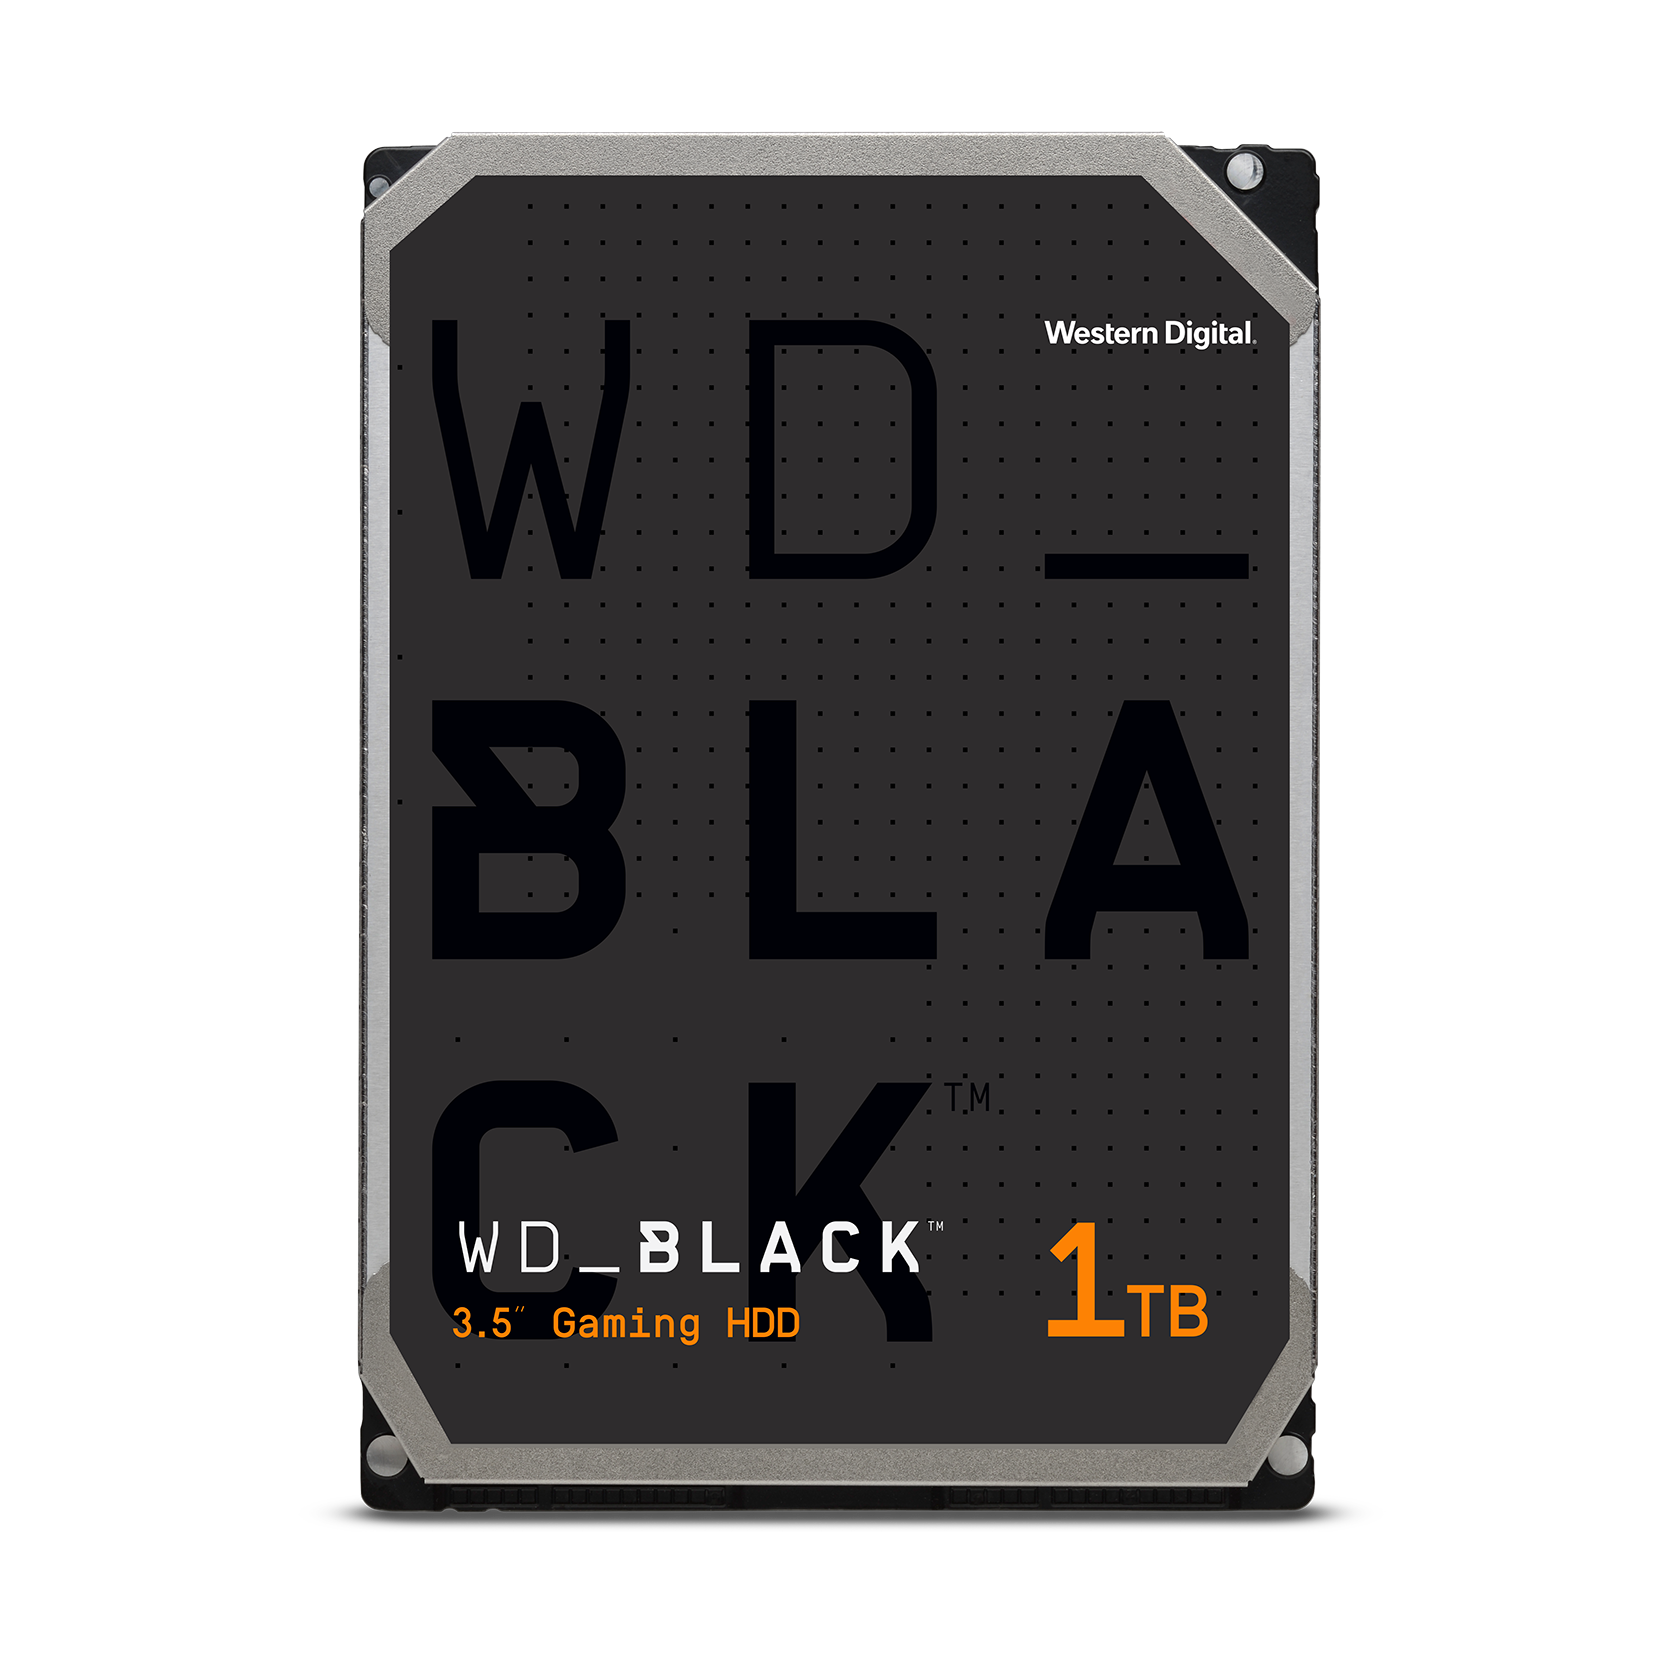 WD_BLACK 1TB 3.5'' Internal Gaming Hard Drive, 64MB Cache - WD1003FZEX - image 2 of 2